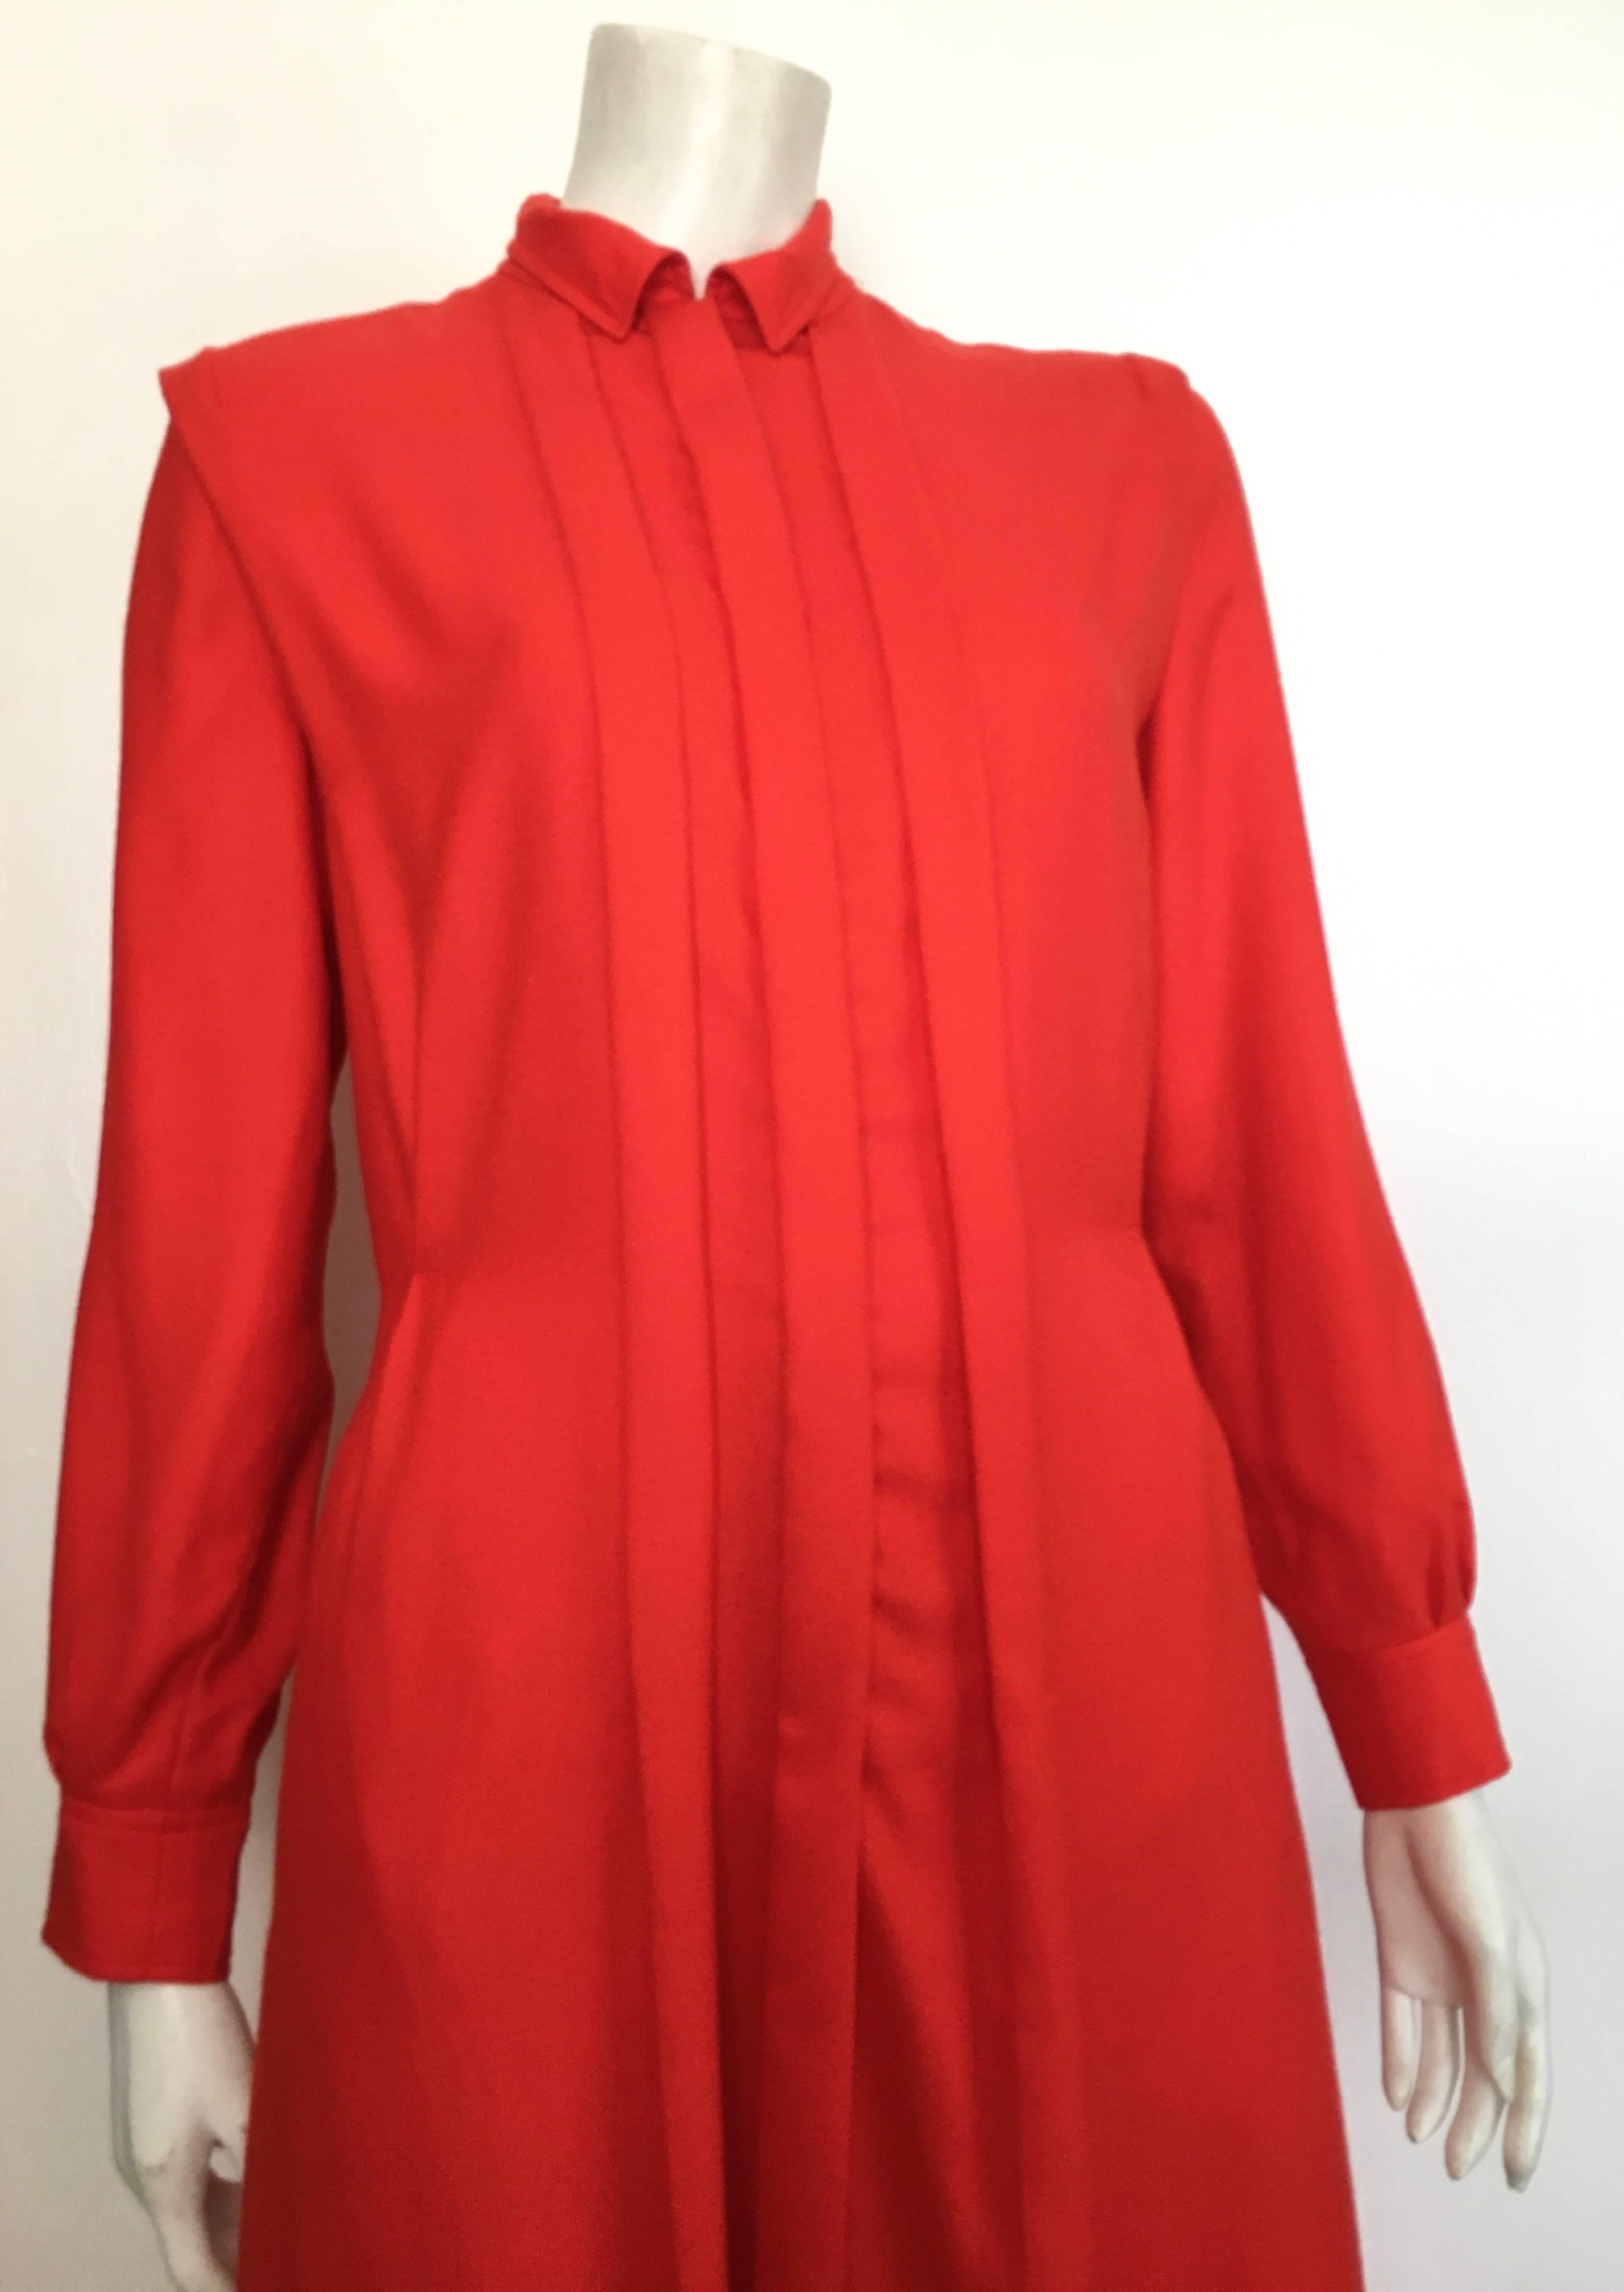 Courreges Paris 1980s fire engine red wool long sleeve dress with pockets is a size 8. The waist on this dress is 32